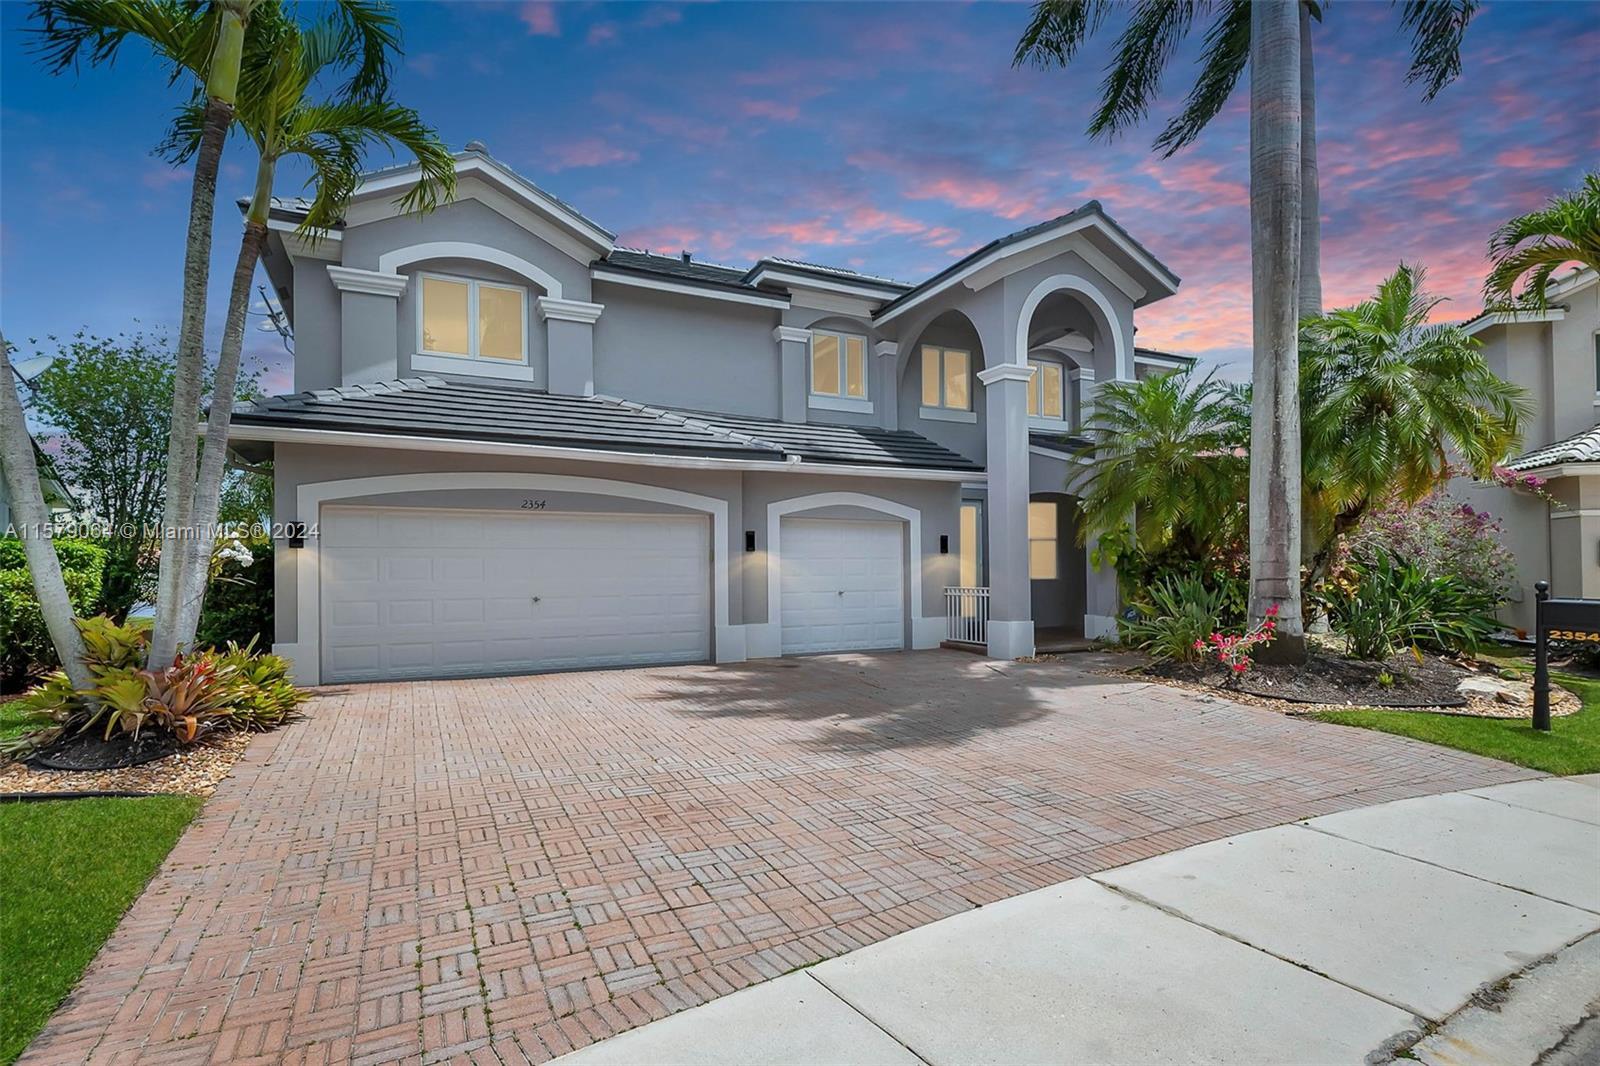 Photo of 2354 Quail Roost Dr in Weston, FL